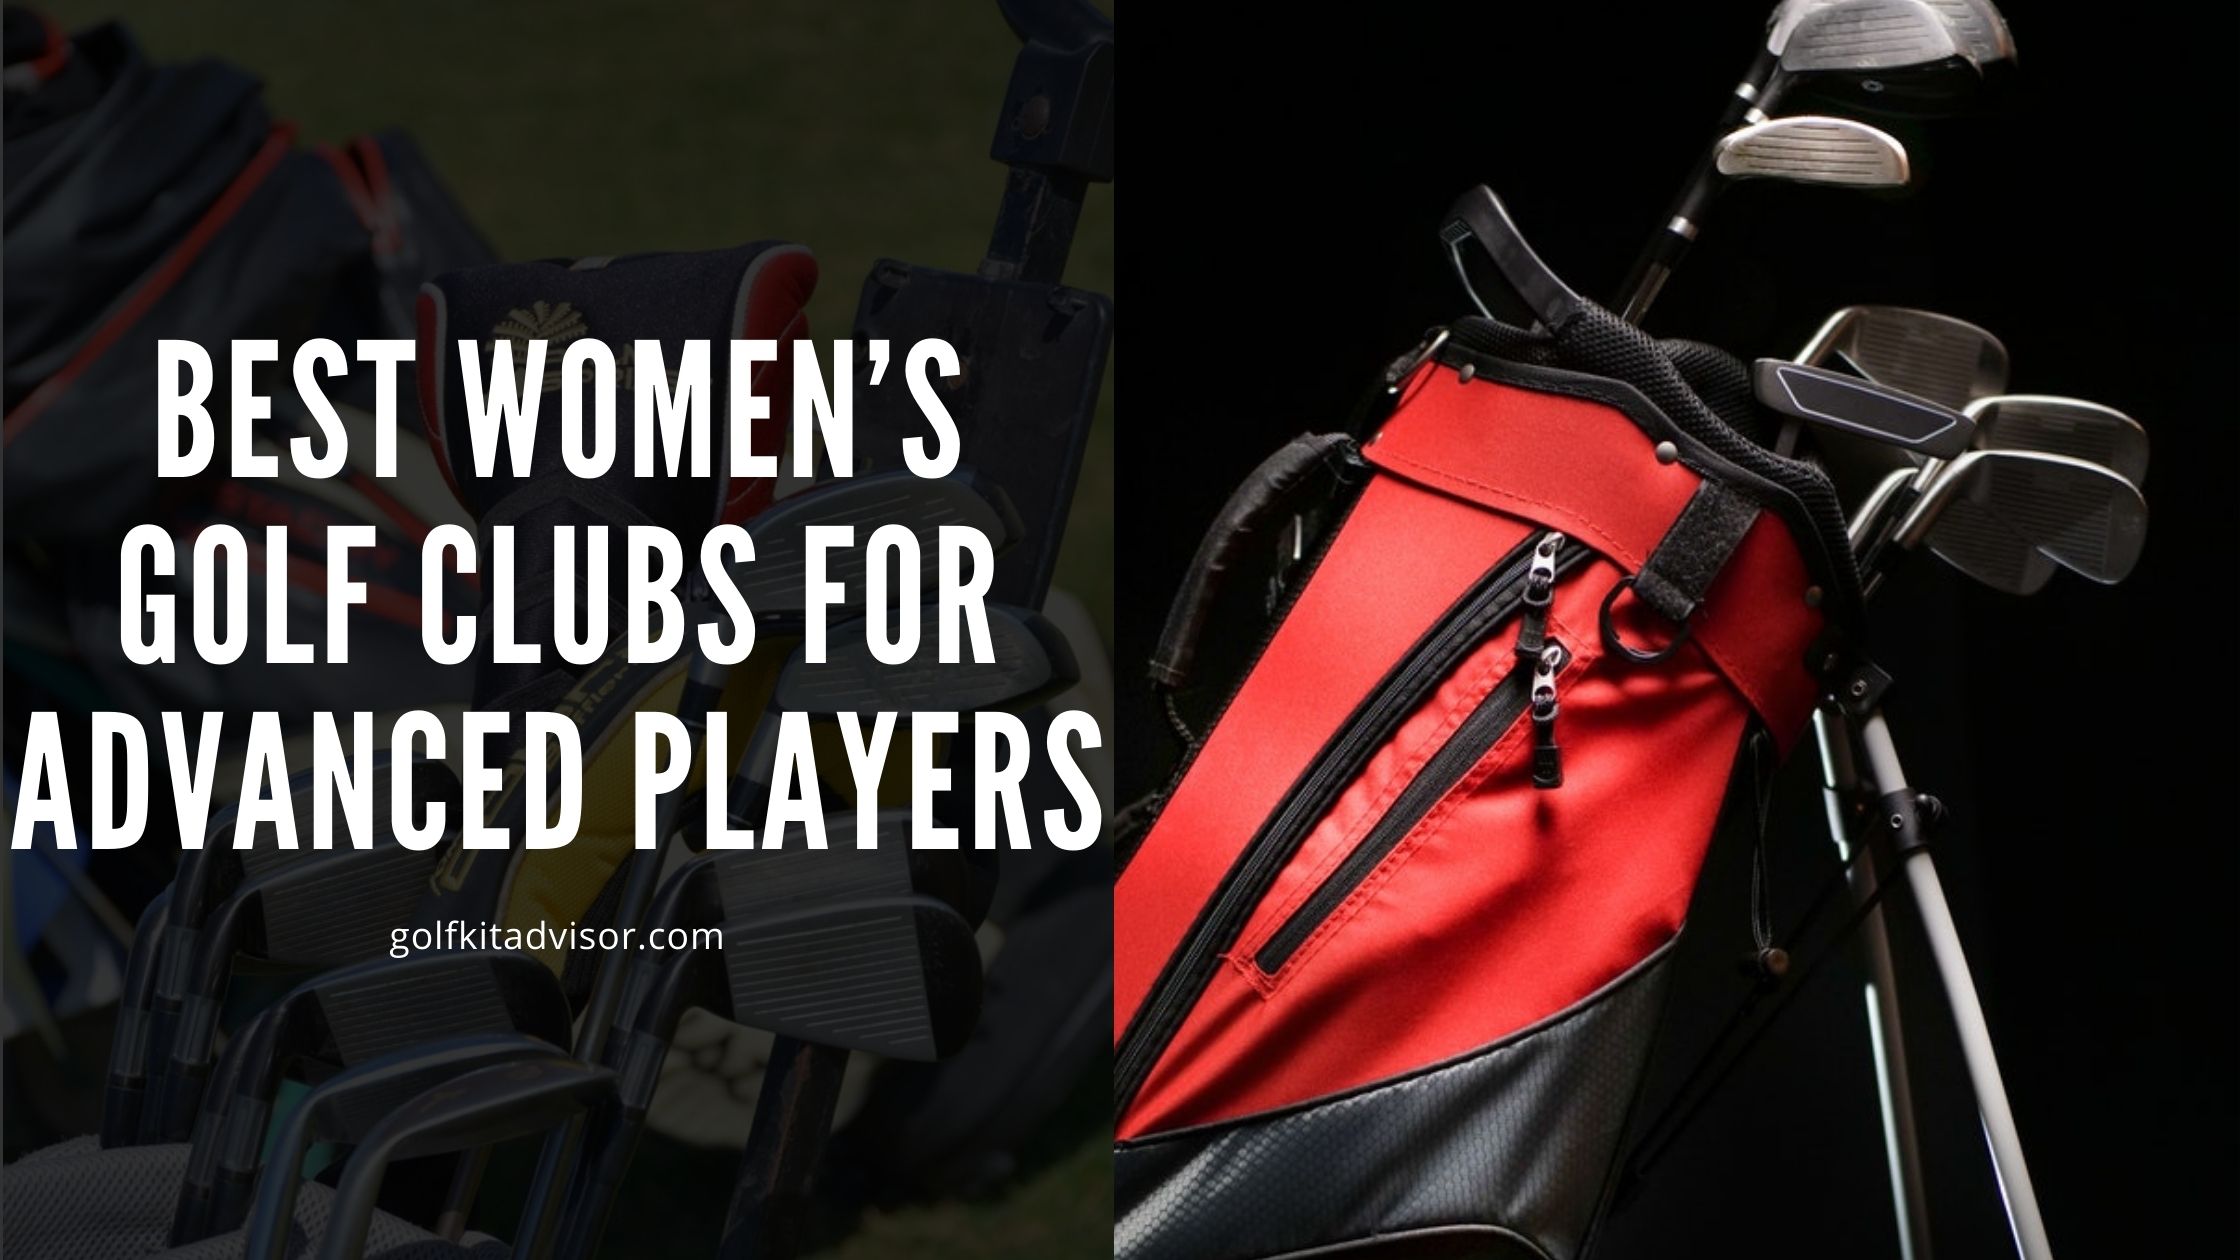 Best Women’s Golf Clubs for Advanced Players